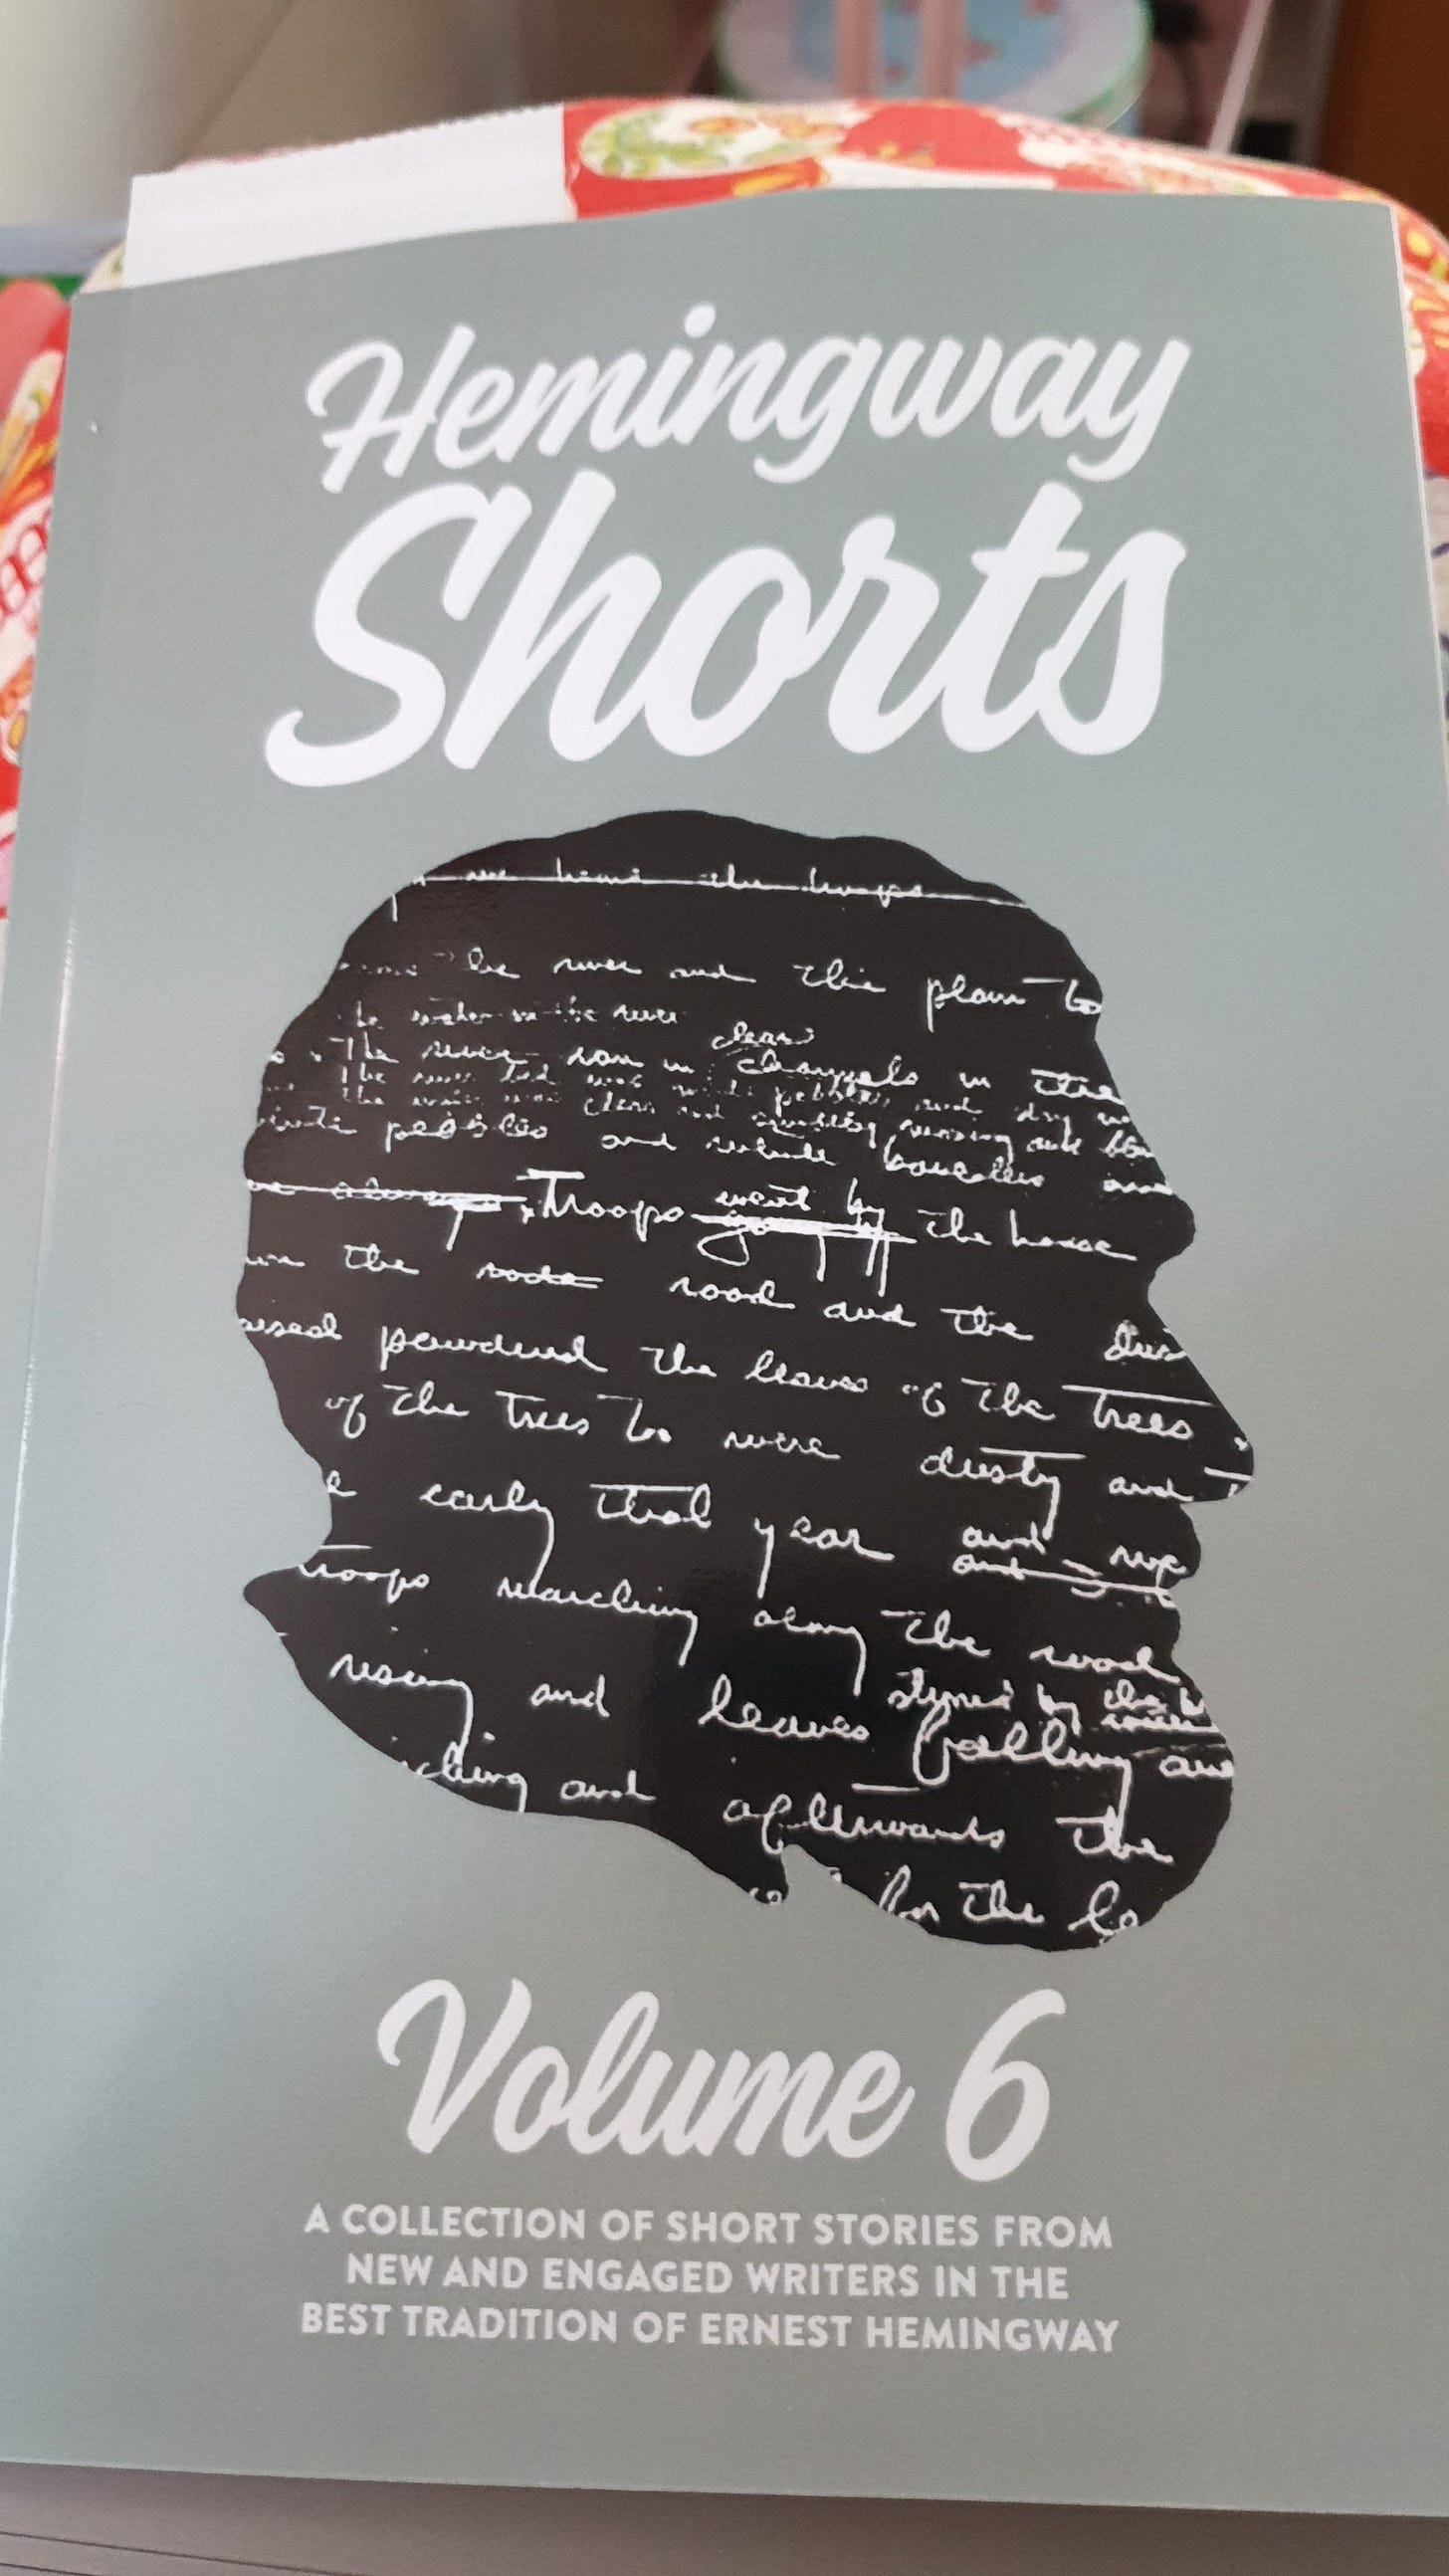 Image shows the book cover, a grey background with the title ‘Hemingway Shorts’ at the top then a black silhouette face shape of Hemingway with his handwriting in white lettering. At the bottom it reads ‘Volume Six a collection of short stories from new and engaged authors in the best tradition of Ernest Hemingway’.